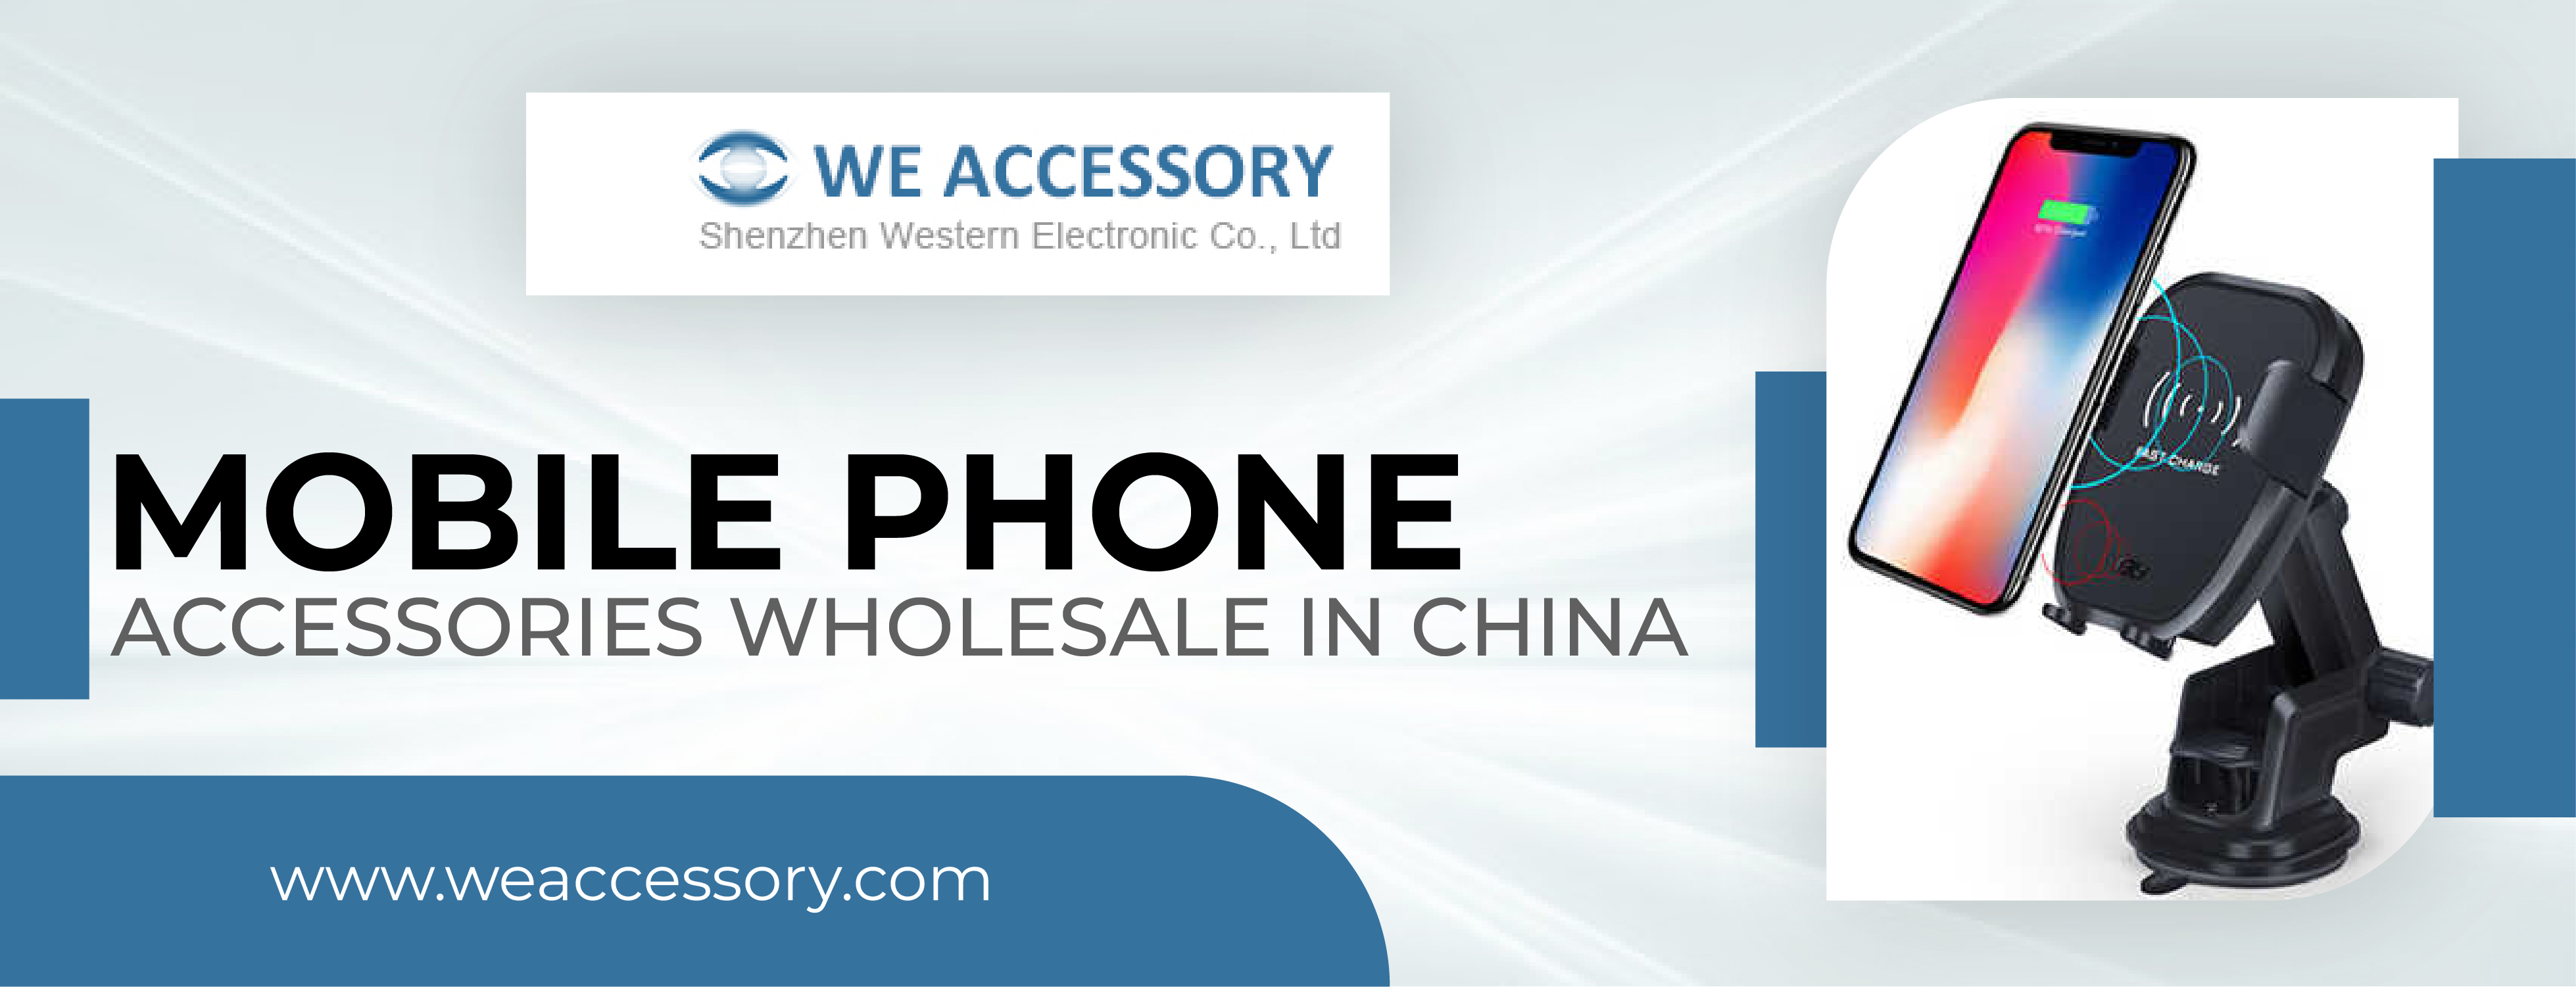 mobile phone accessories wholesale in china